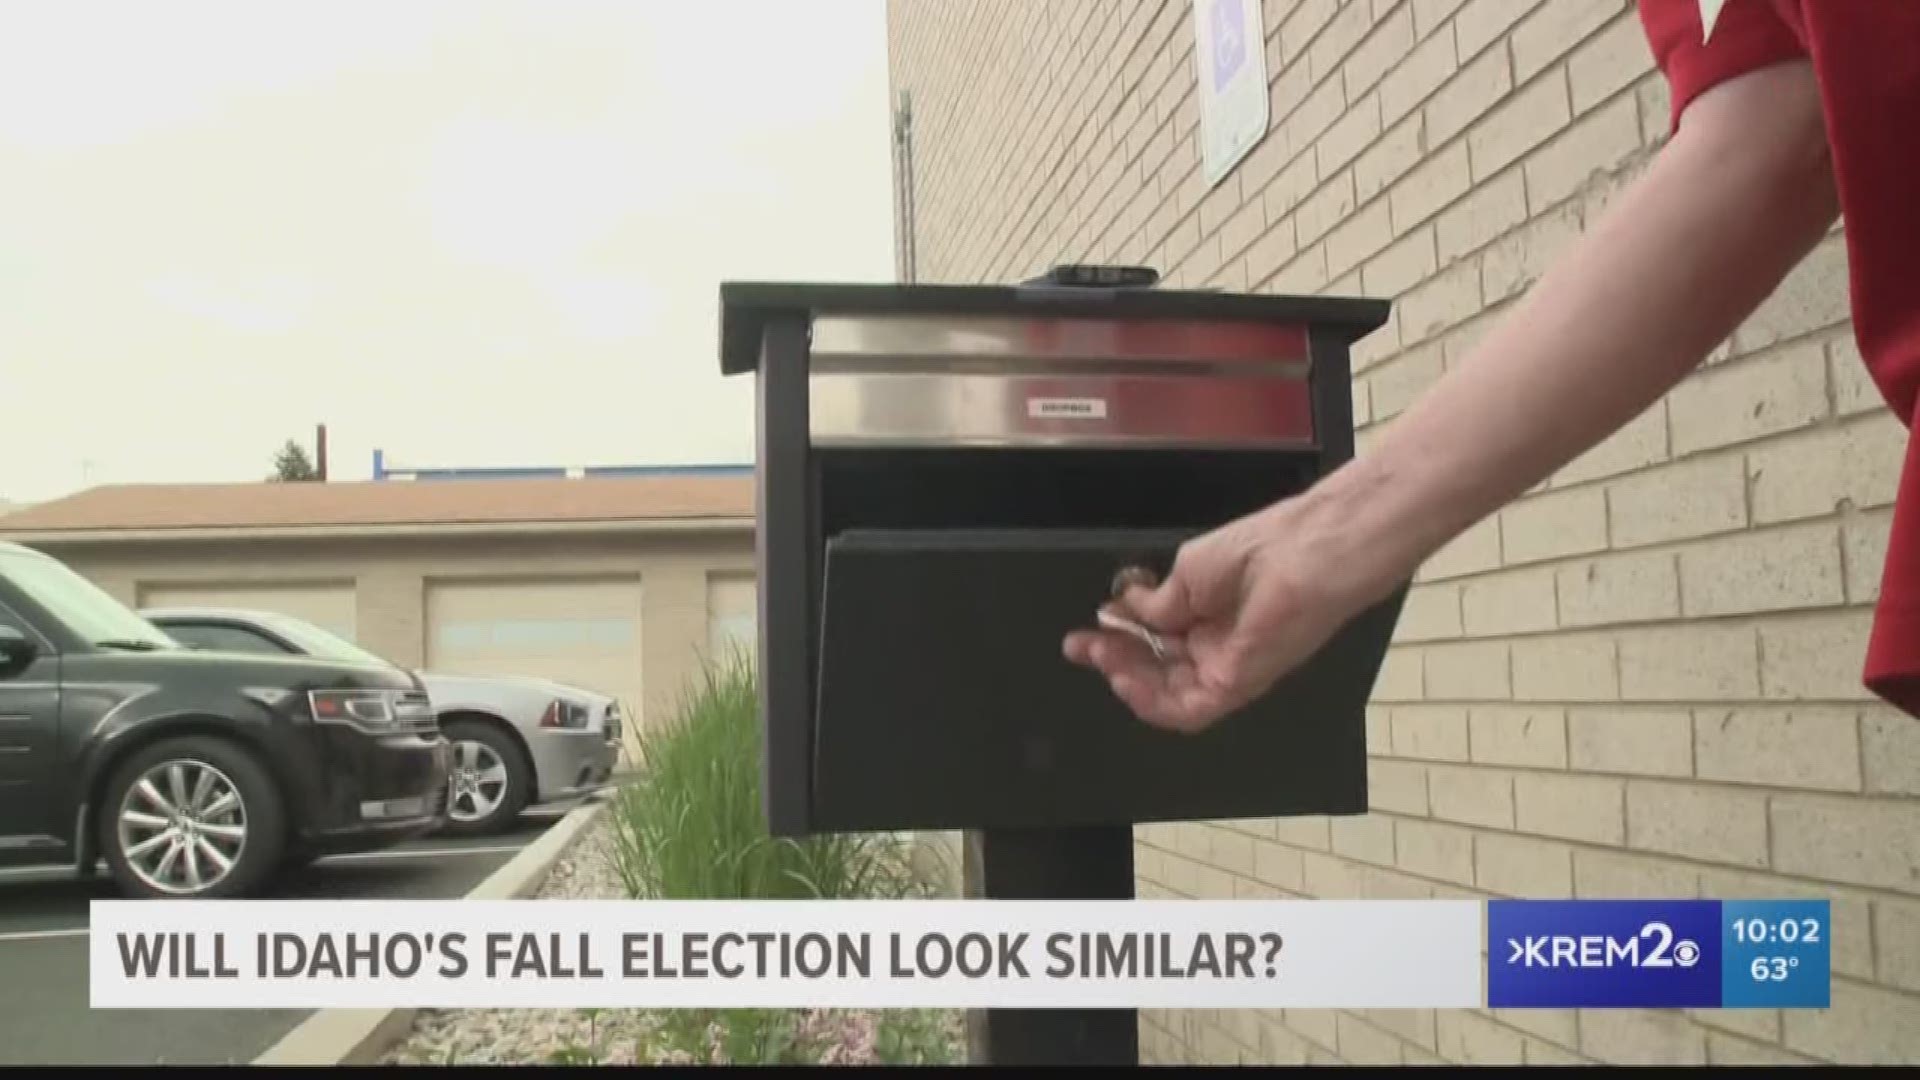 For the first time ever, Idaho held an election completely by mail amid coronavirus concerns.